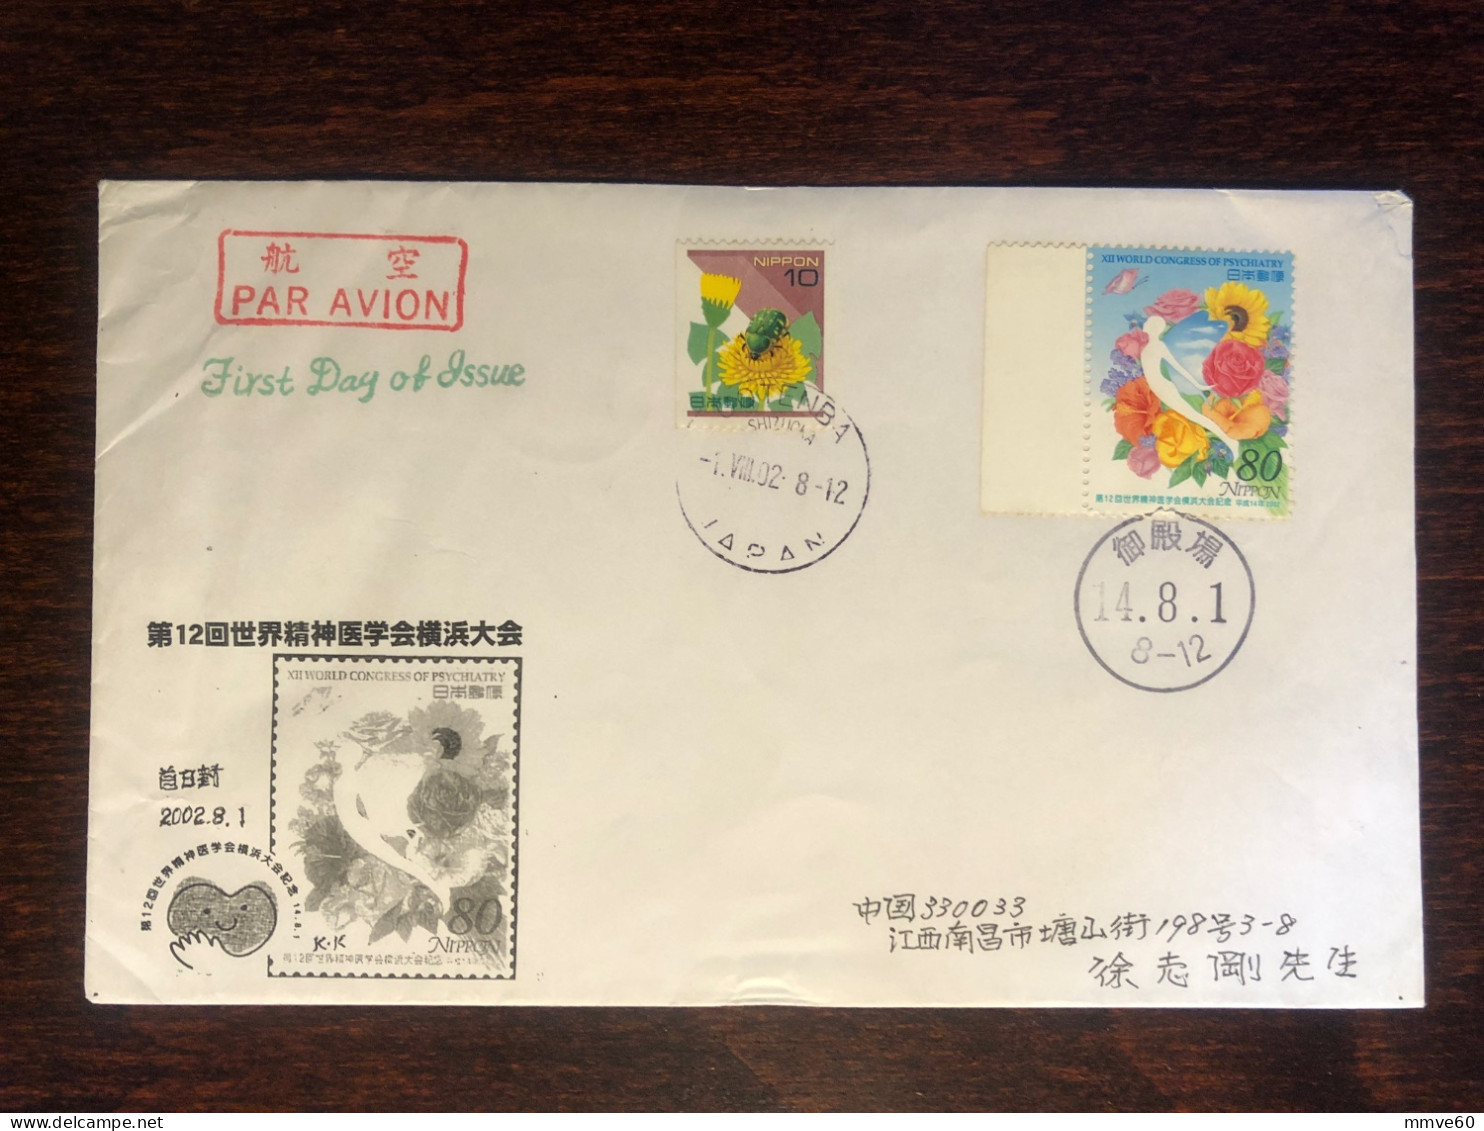 JAPAN FDC COVER 2002 YEAR PSYCHIATRY MENTAL HEALTH MEDICINE STAMPS - FDC